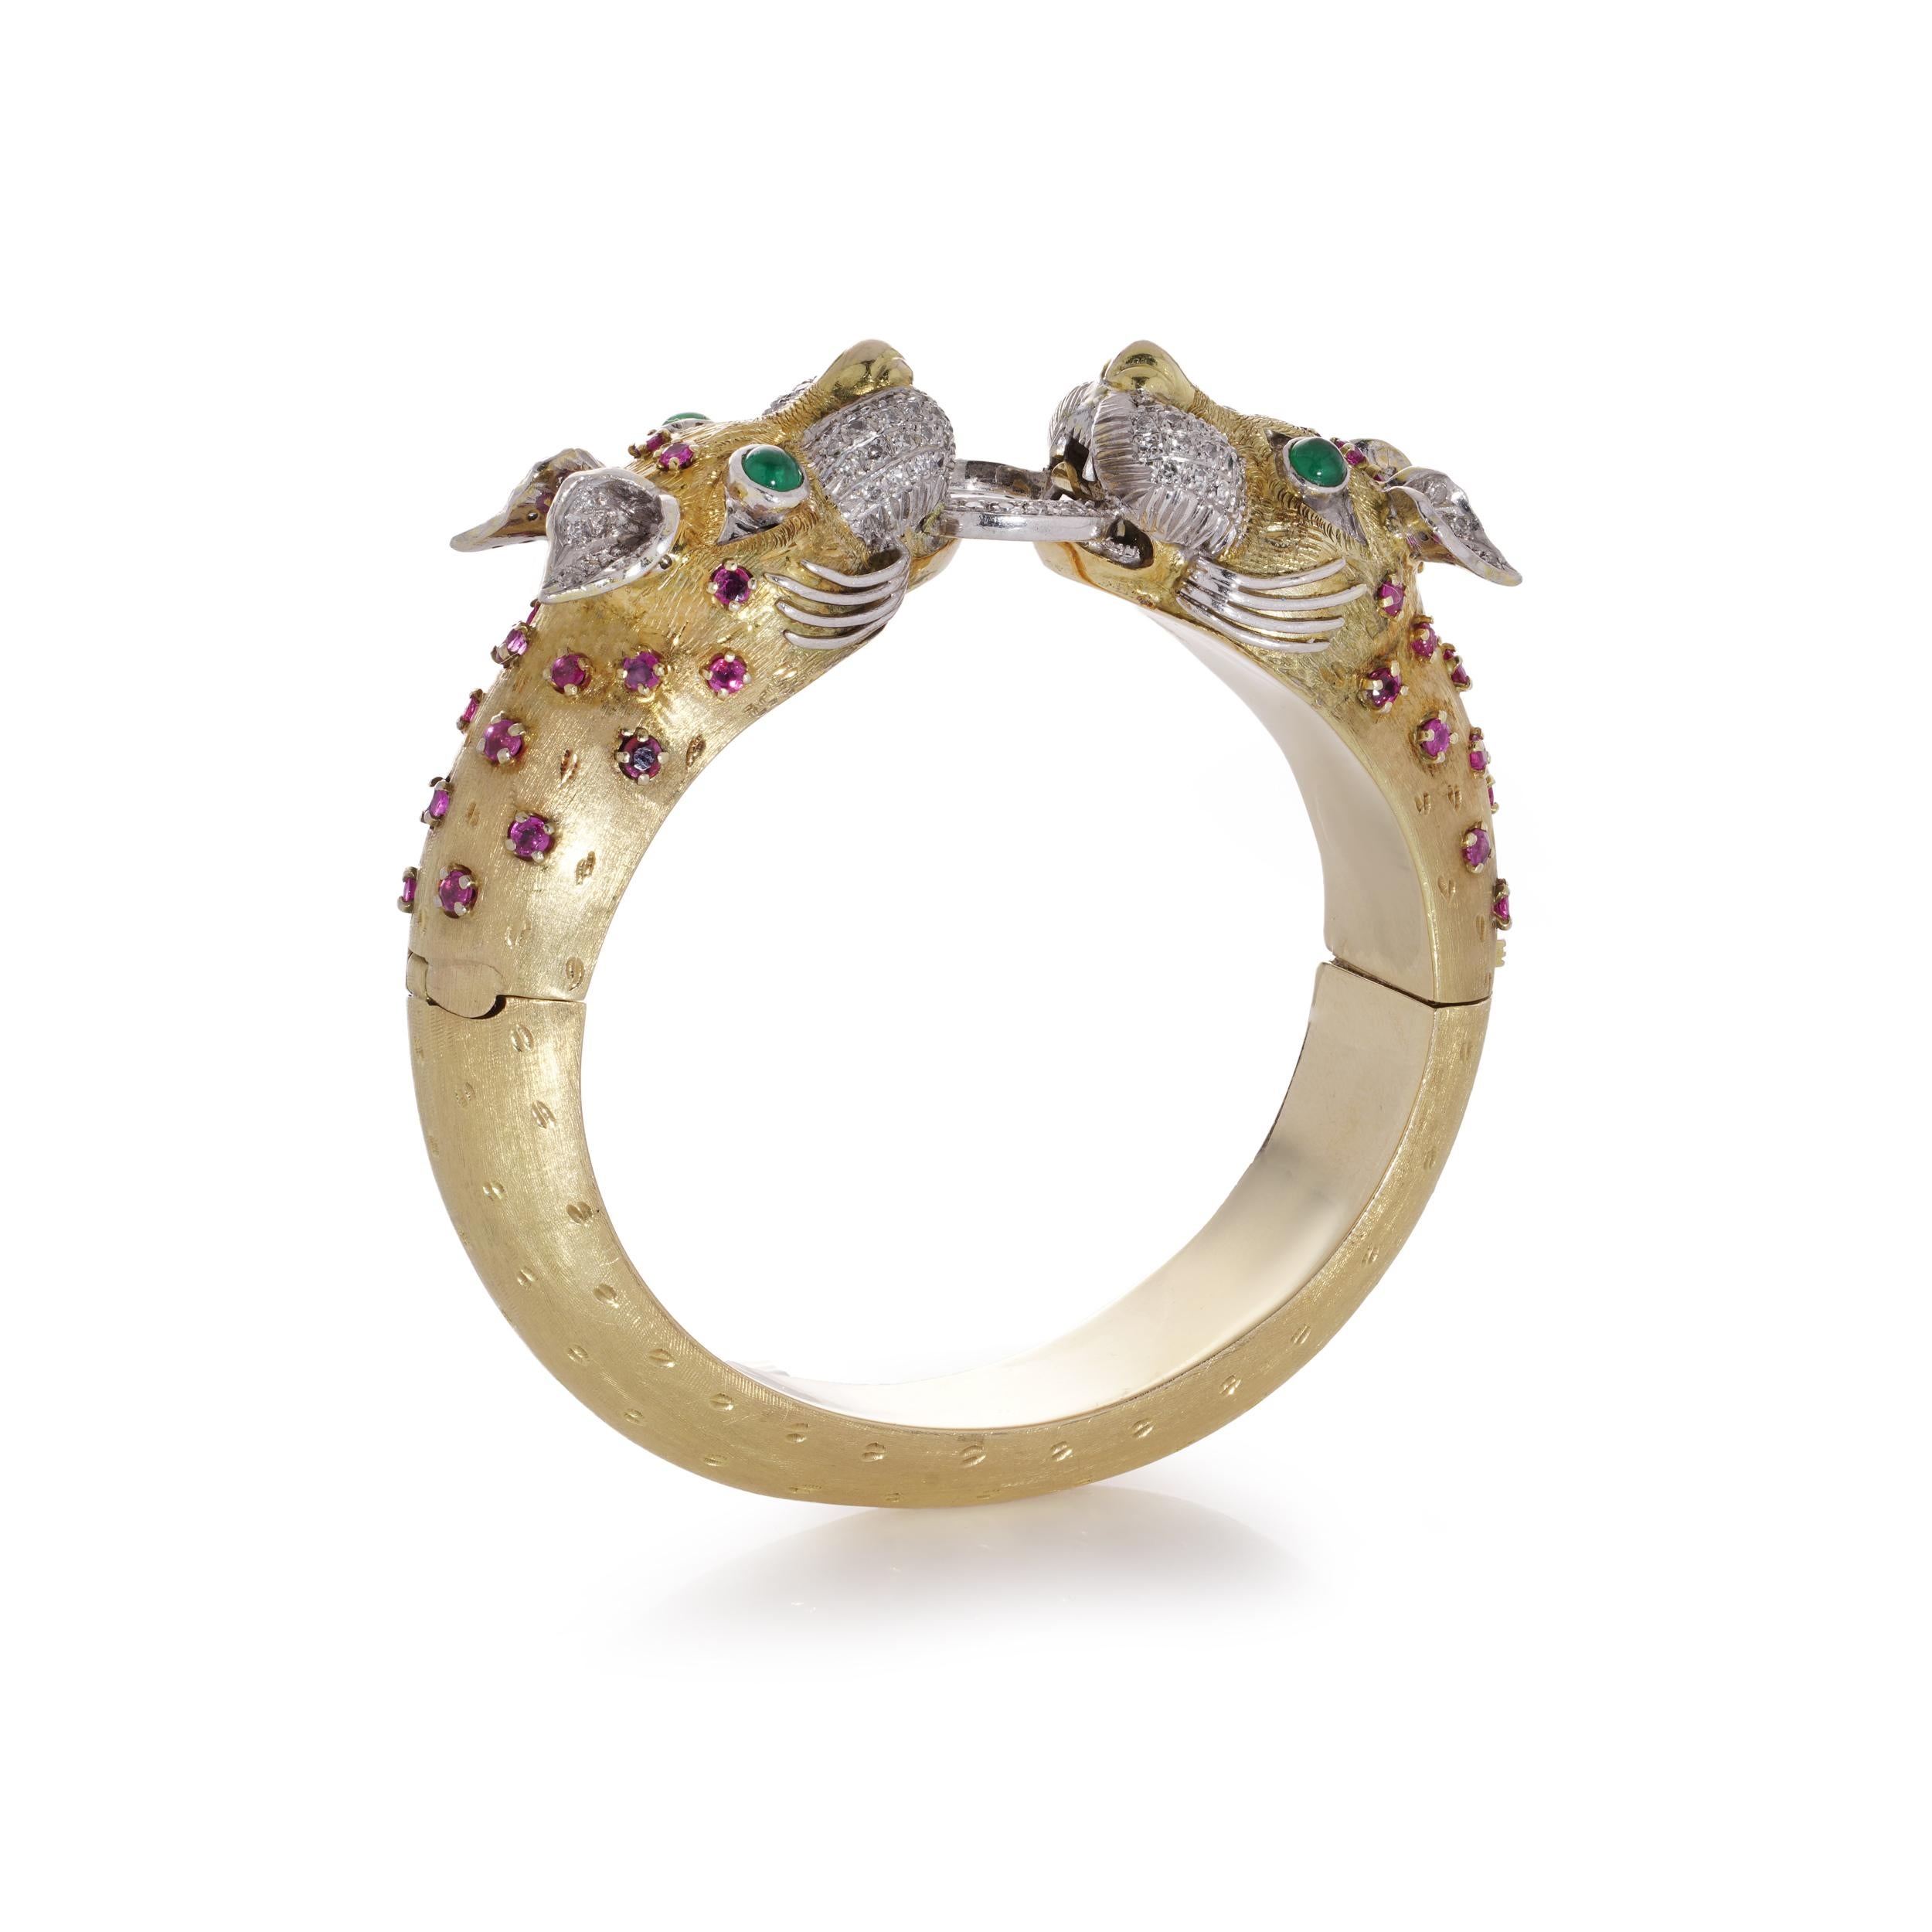 Larry yellow and white gold bangle with two dragon heads with 118 diamonds, emeralds, and rubies.

Approx. Dimensions:
The bangle has an inner diameter: of 59.7 mm x 53.6 mm ( longest x shortest).
The top width is 22.6 mm
The width at the bottom was